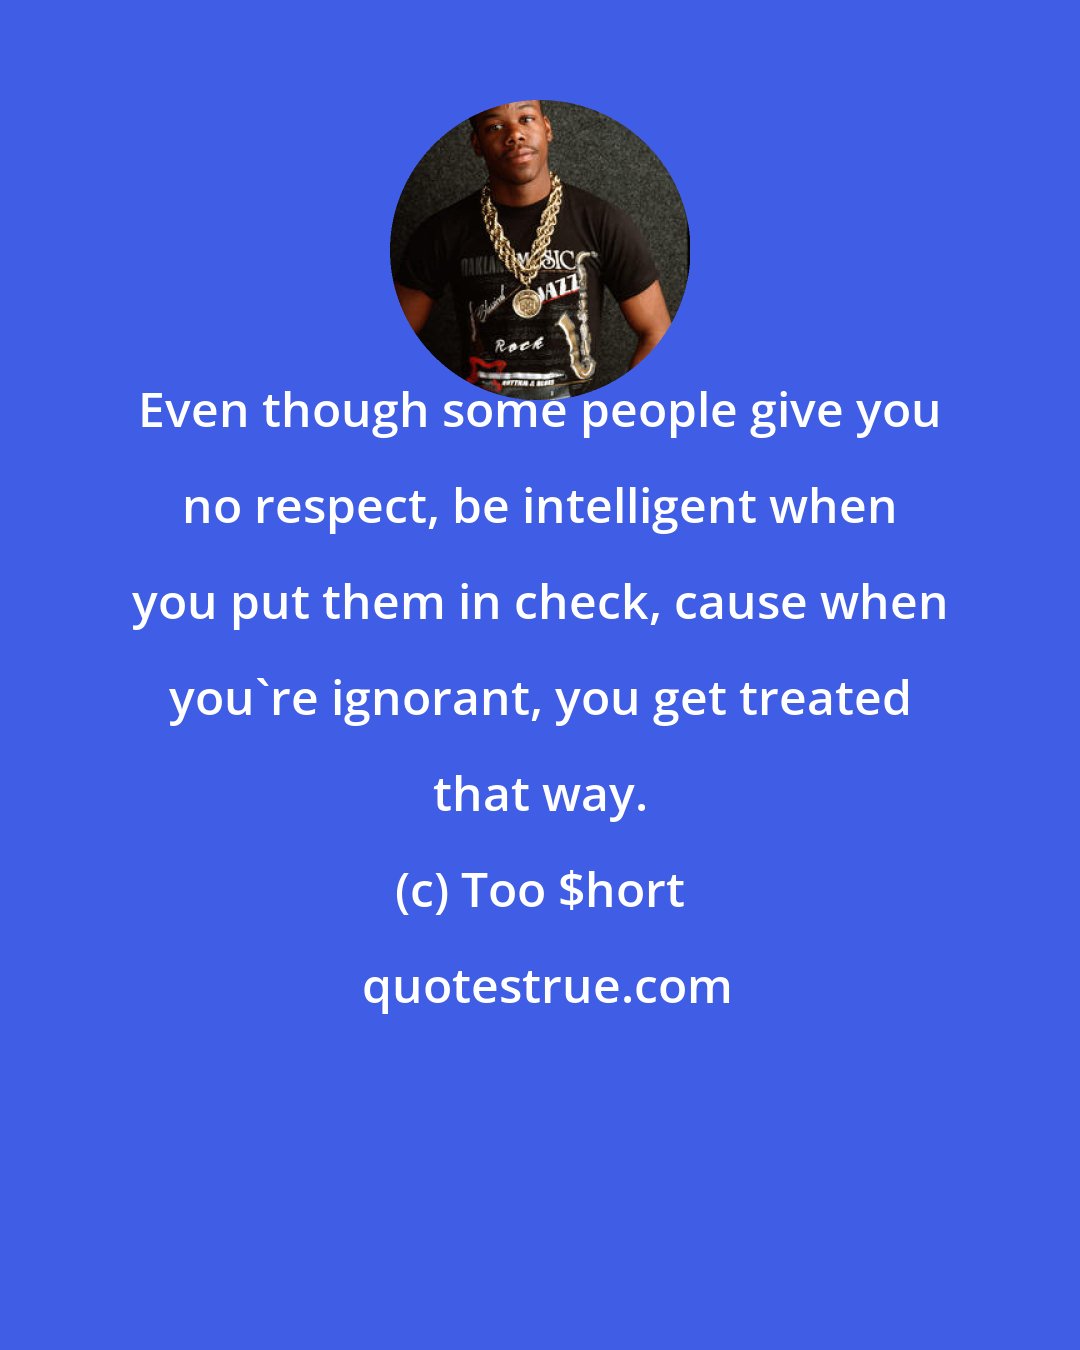 Too $hort: Even though some people give you no respect, be intelligent when you put them in check, cause when you're ignorant, you get treated that way.